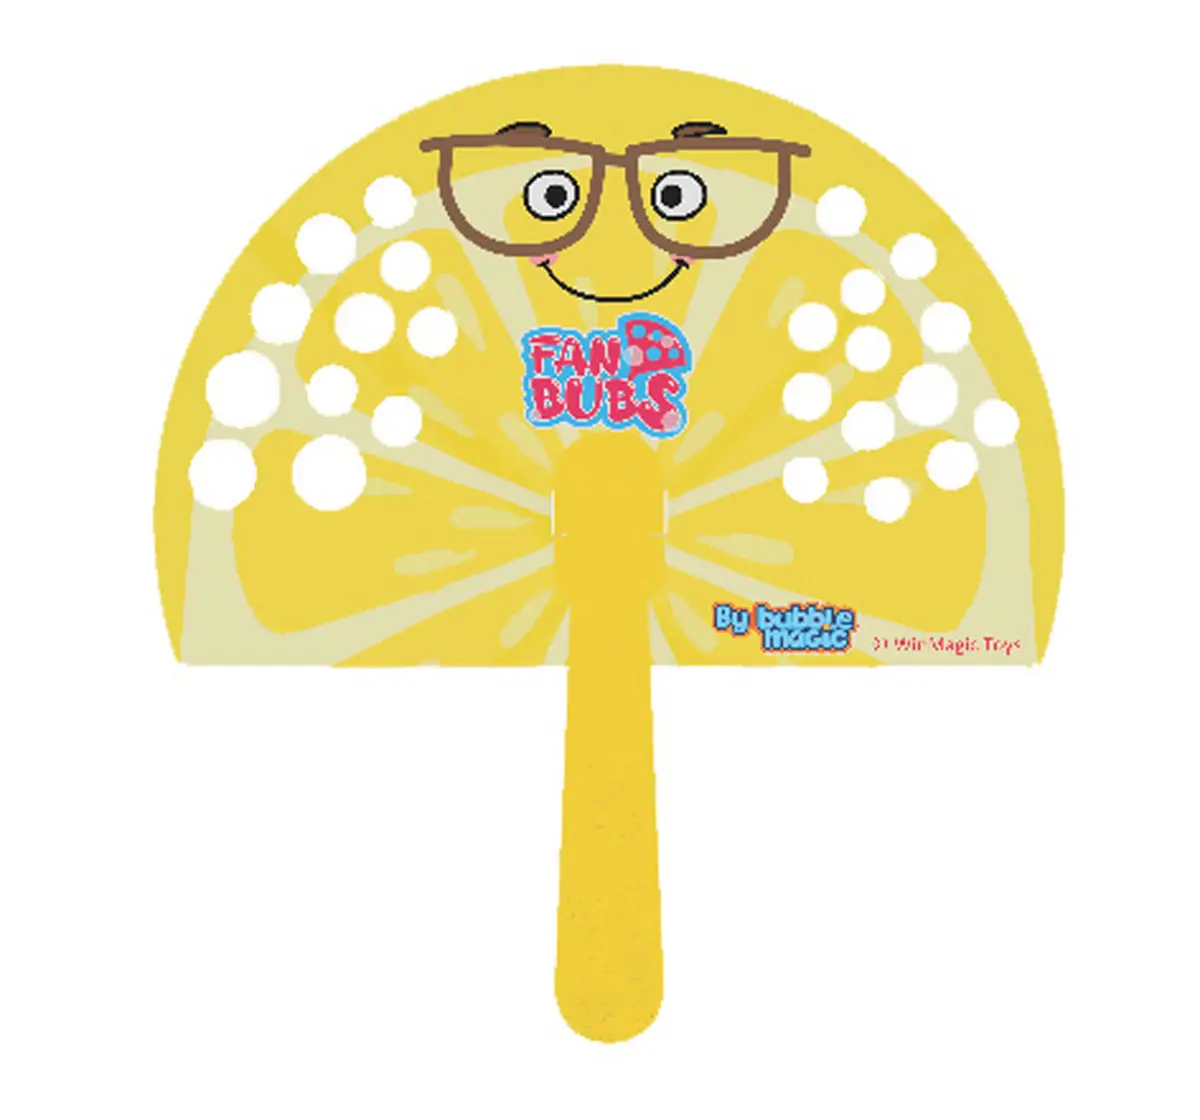 Bubble Magic Fan Bubs Lime, for The Kids 3 Years and Above